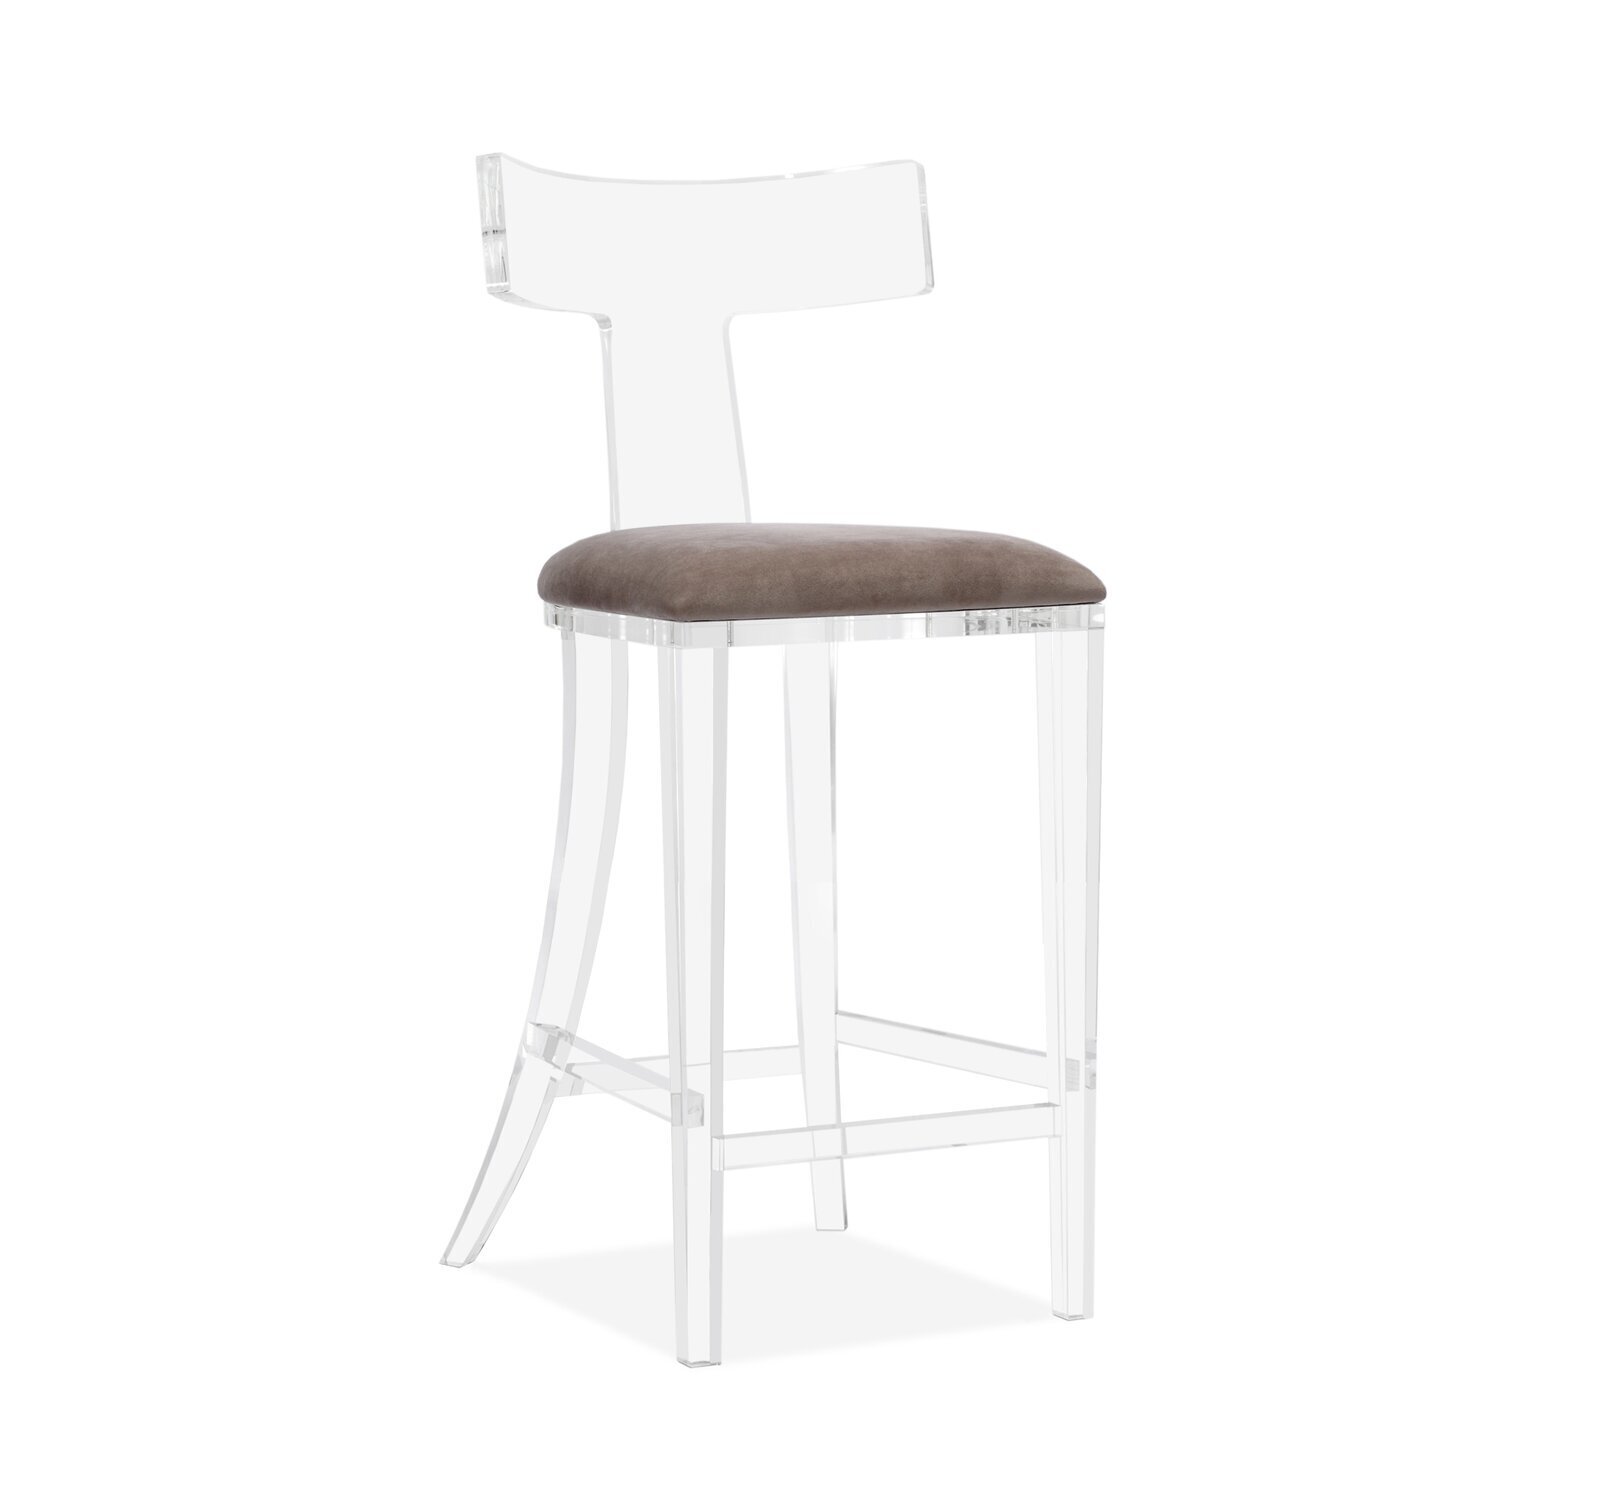 Ghost bar stool with a neutral seat and creative back